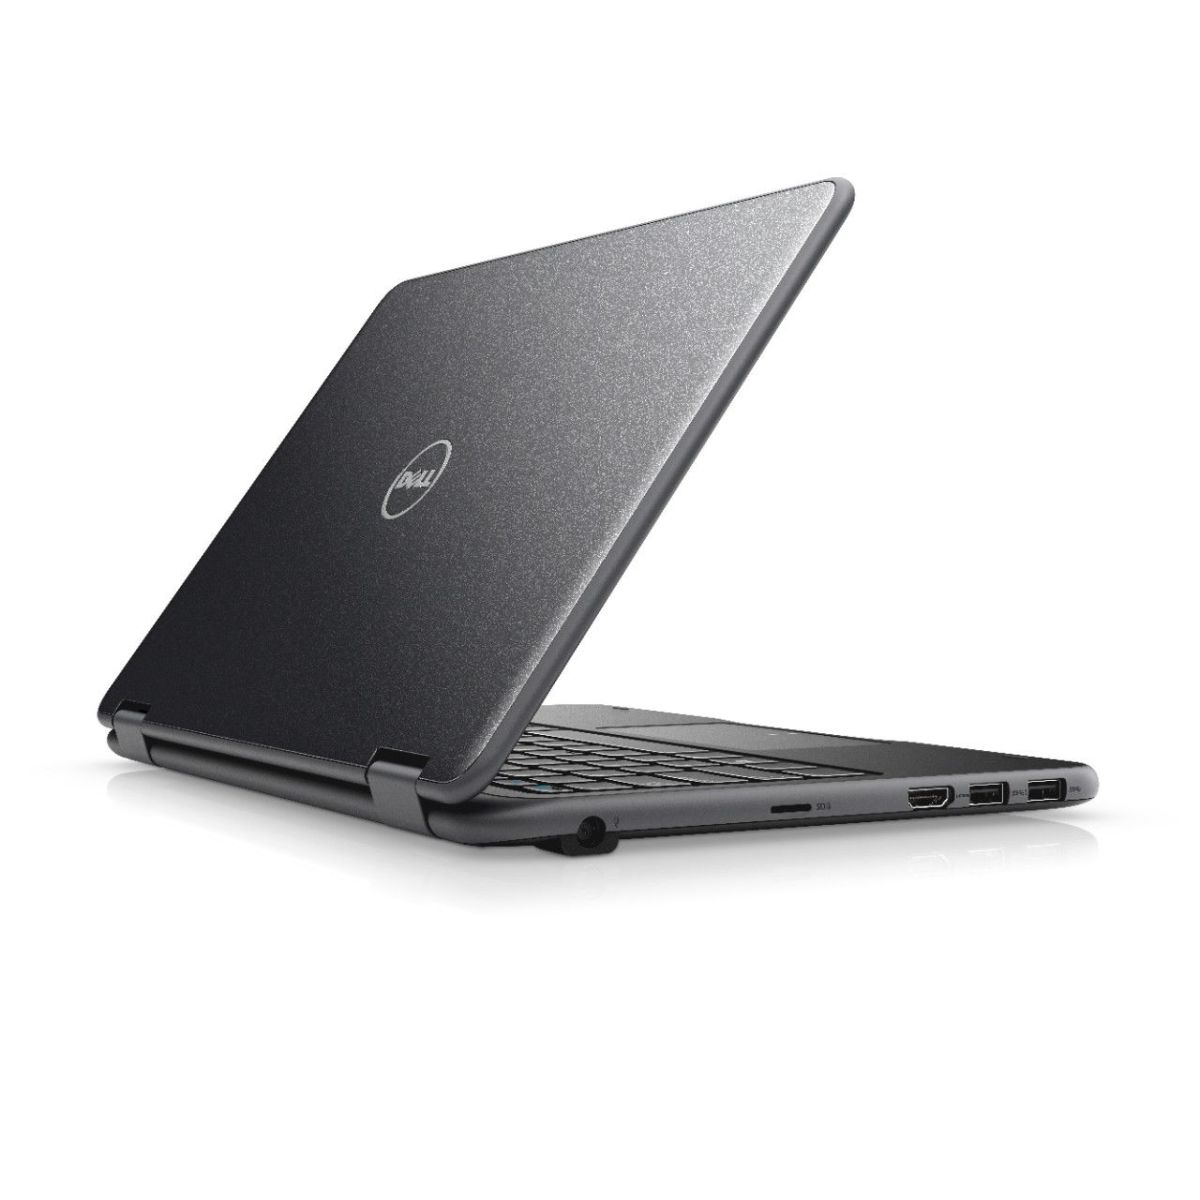 DELL Latitude 3189 - 3RGF2 laptop specifications